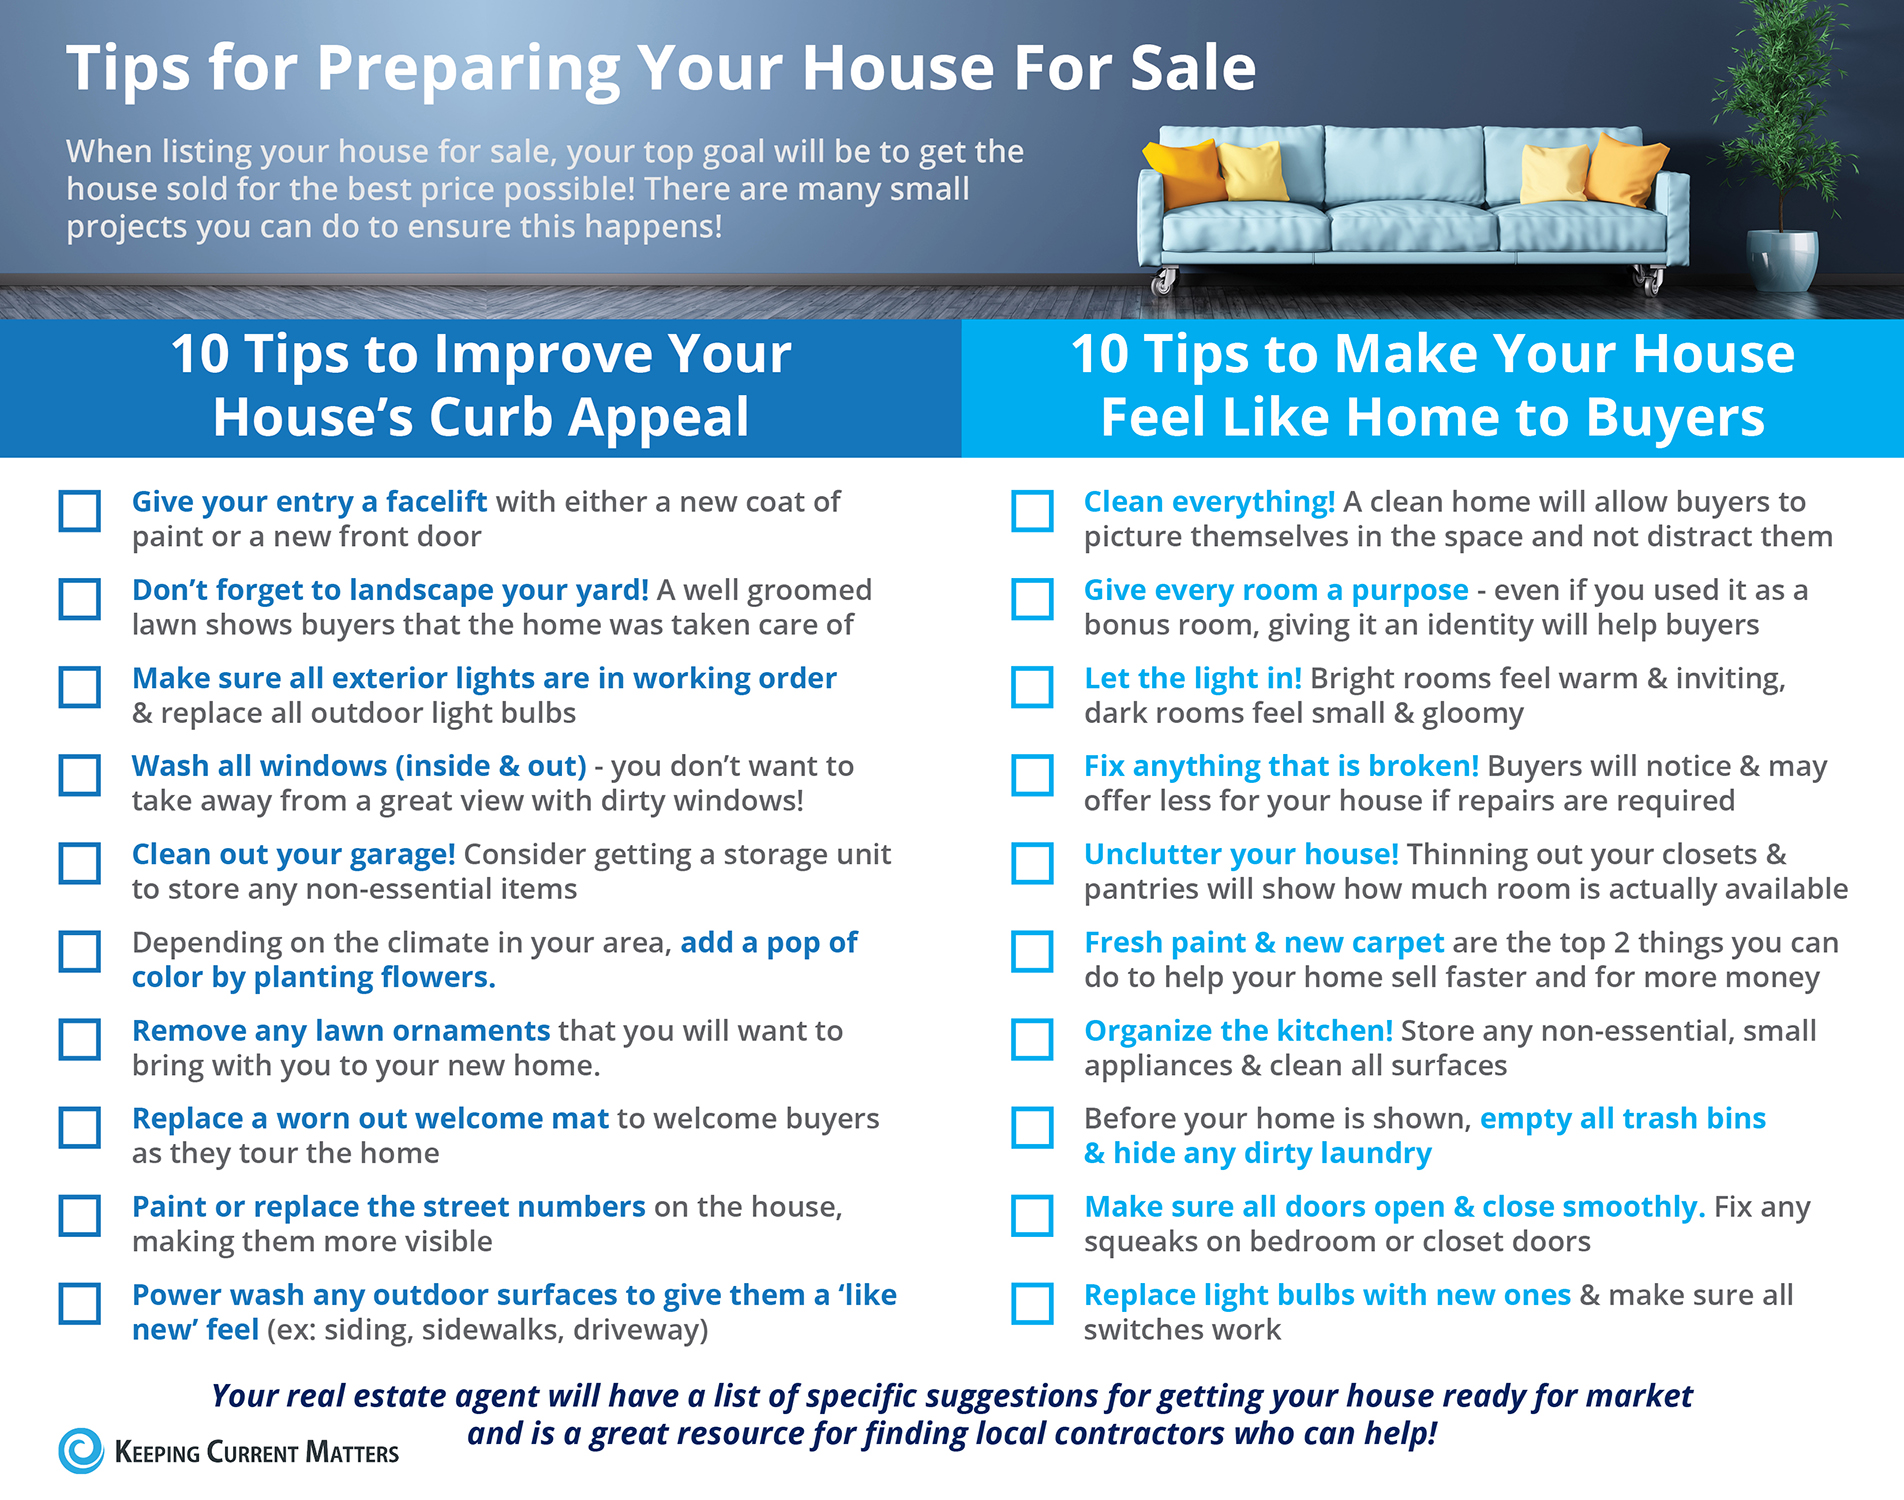 20 Tips for Preparing Your House for Sale [INFOGRAPHIC] | Keeping Current Matters